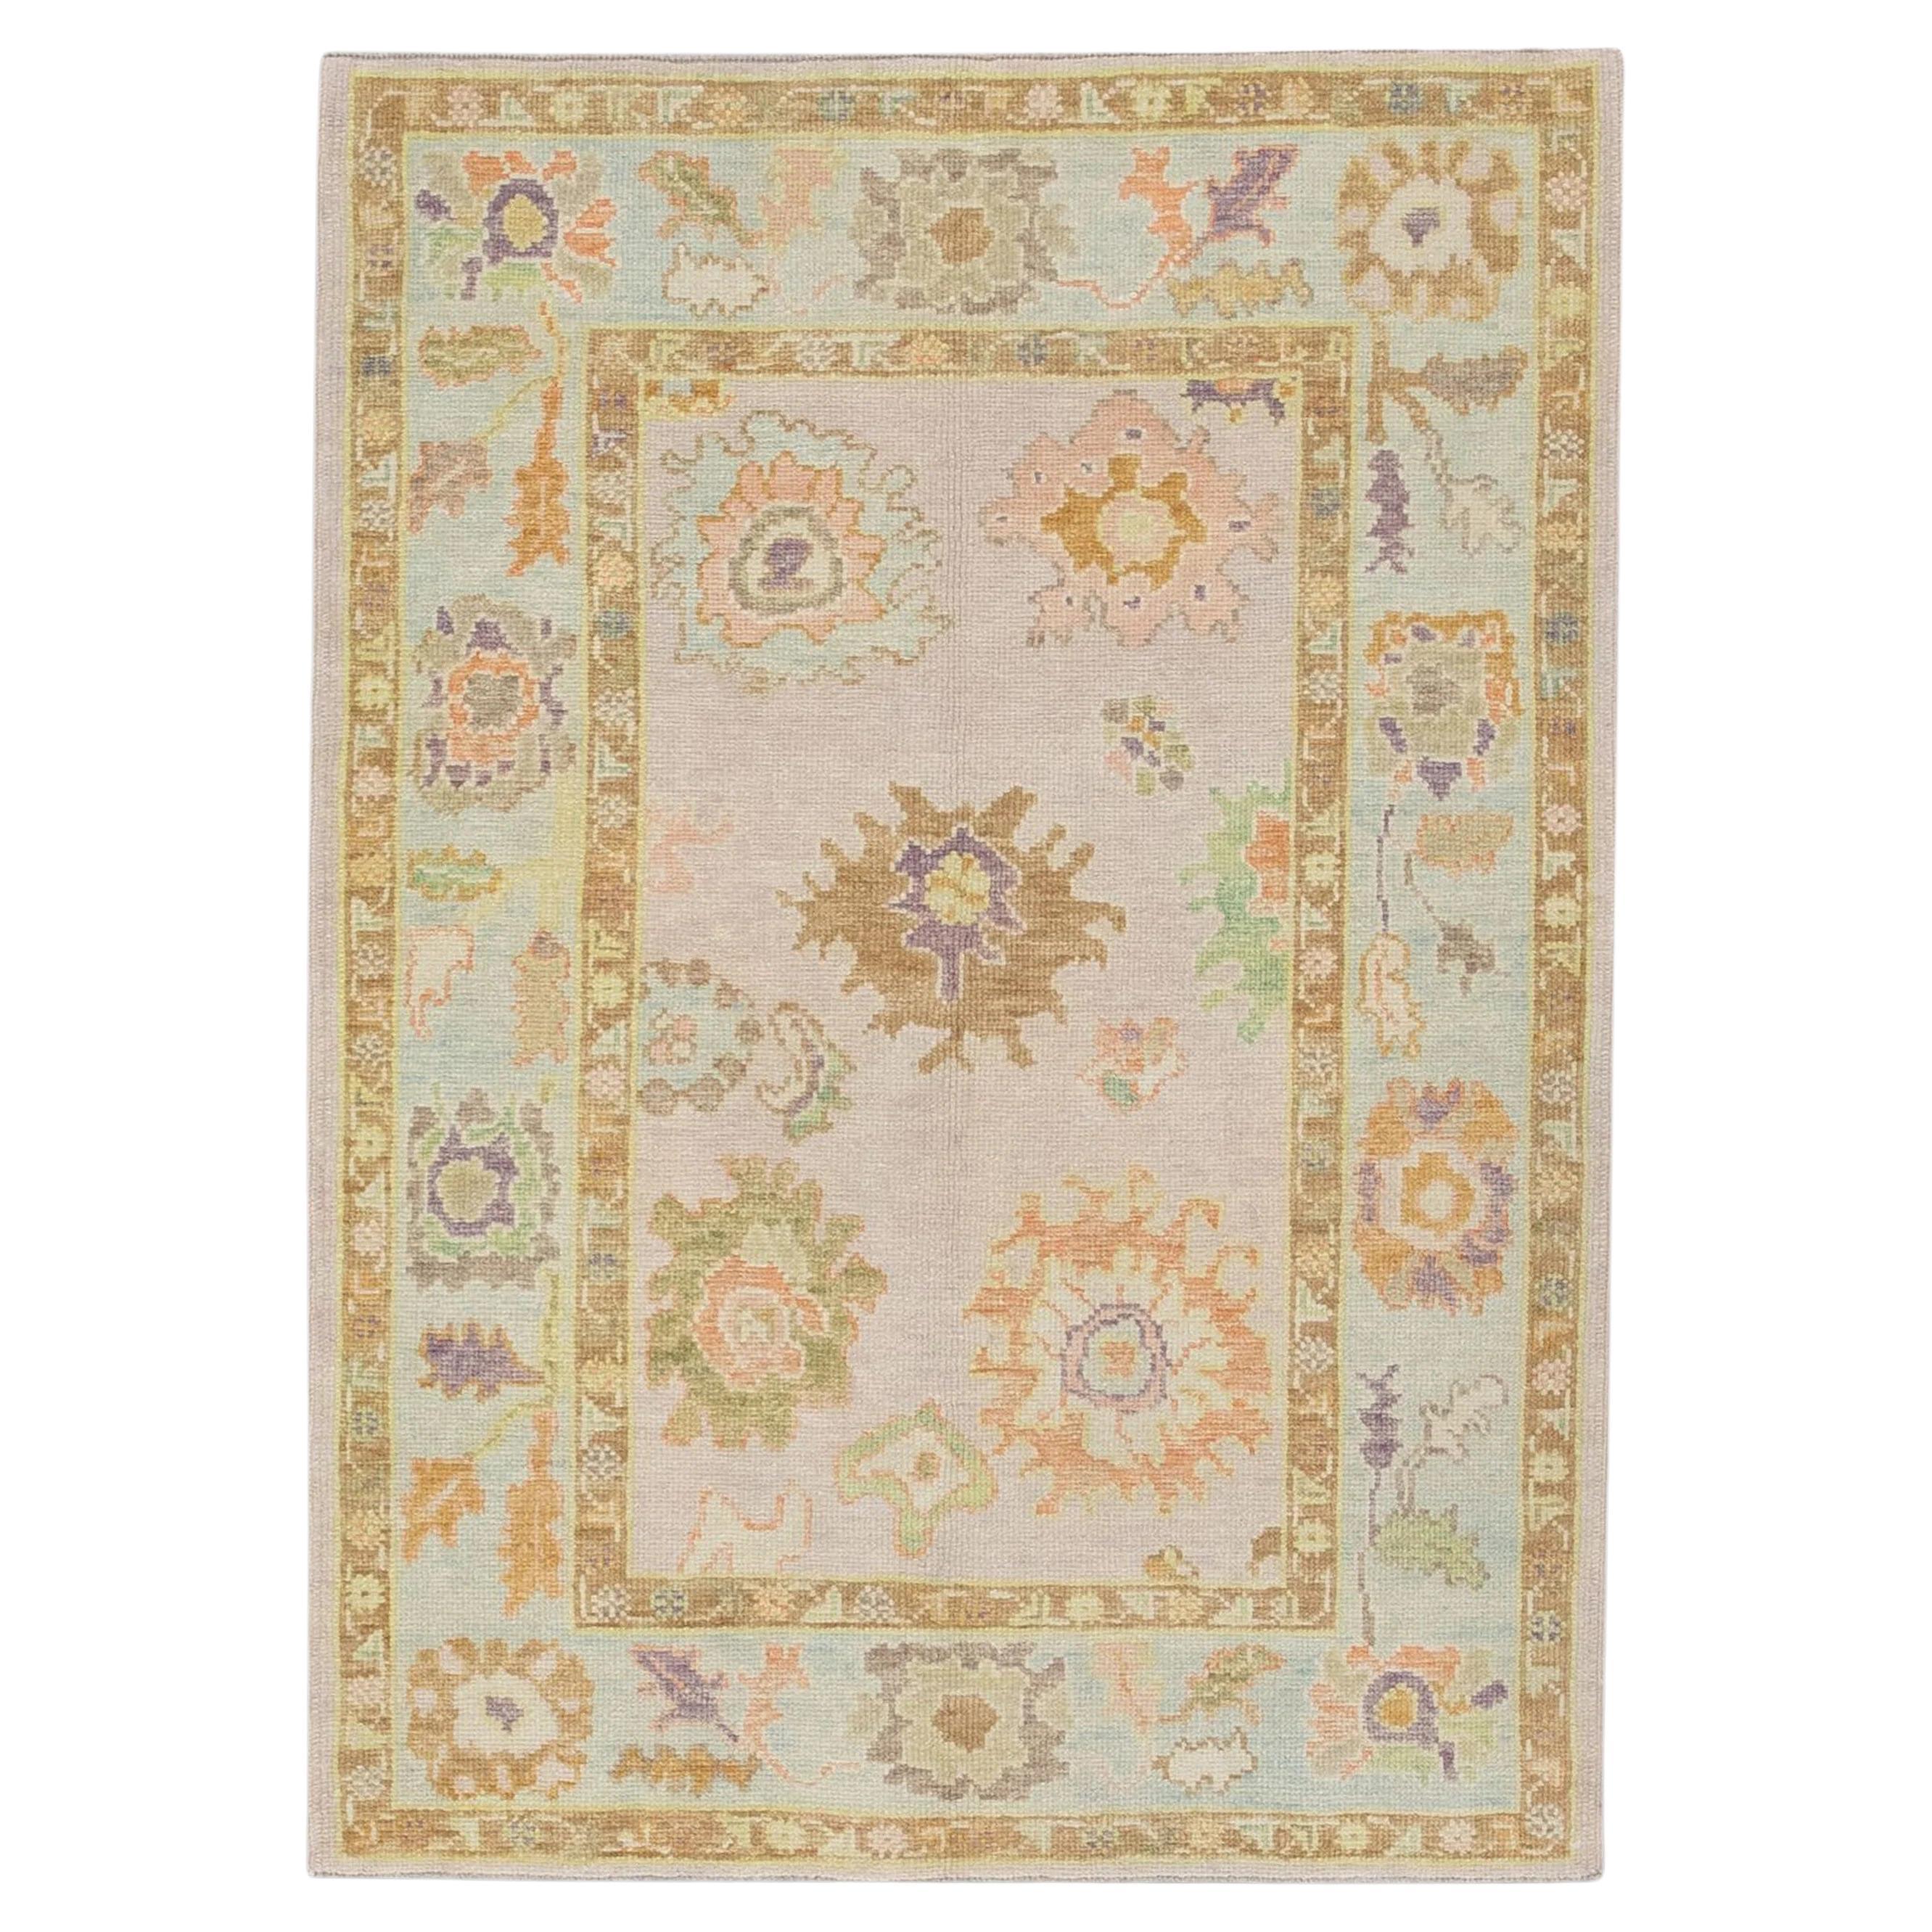 Handwoven Wool Turkish Oushak Rug Lilac Field Multicolor Floral Design 4'2 x 5'7 For Sale